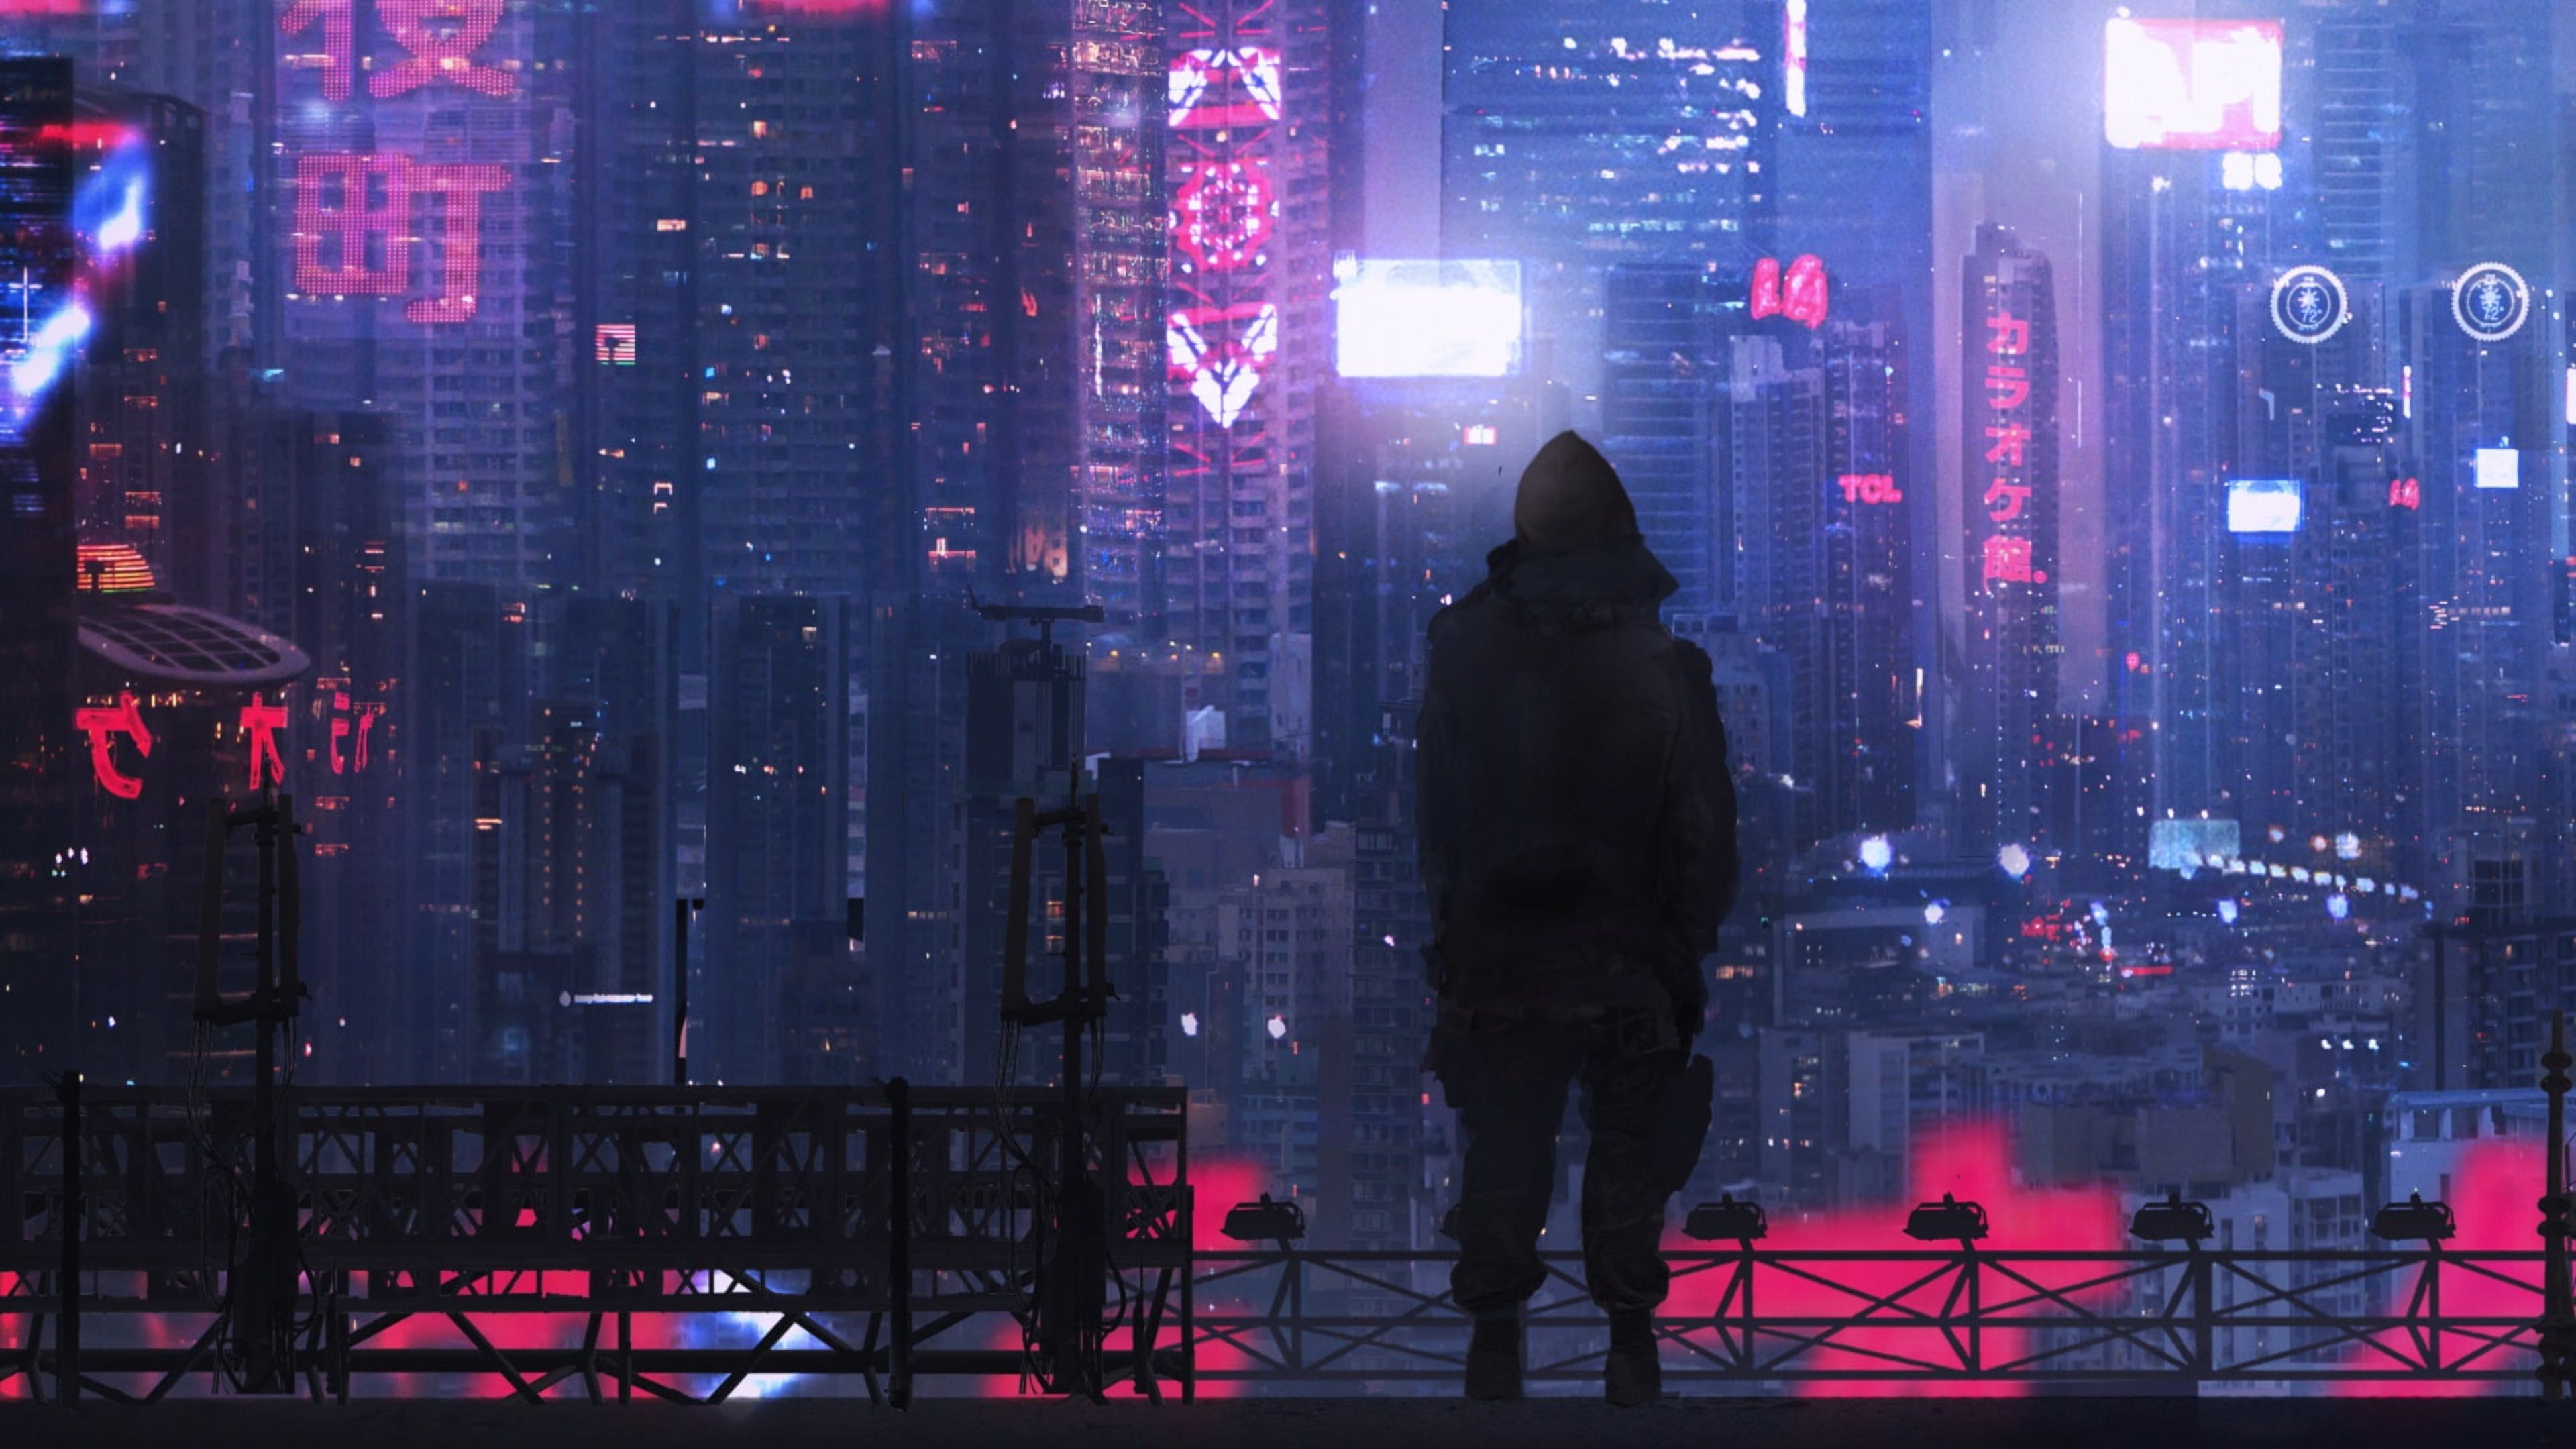 Cyberpunk 4k Wallpapers For Your Desktop Or Mobile Screen Free And Easy To Download